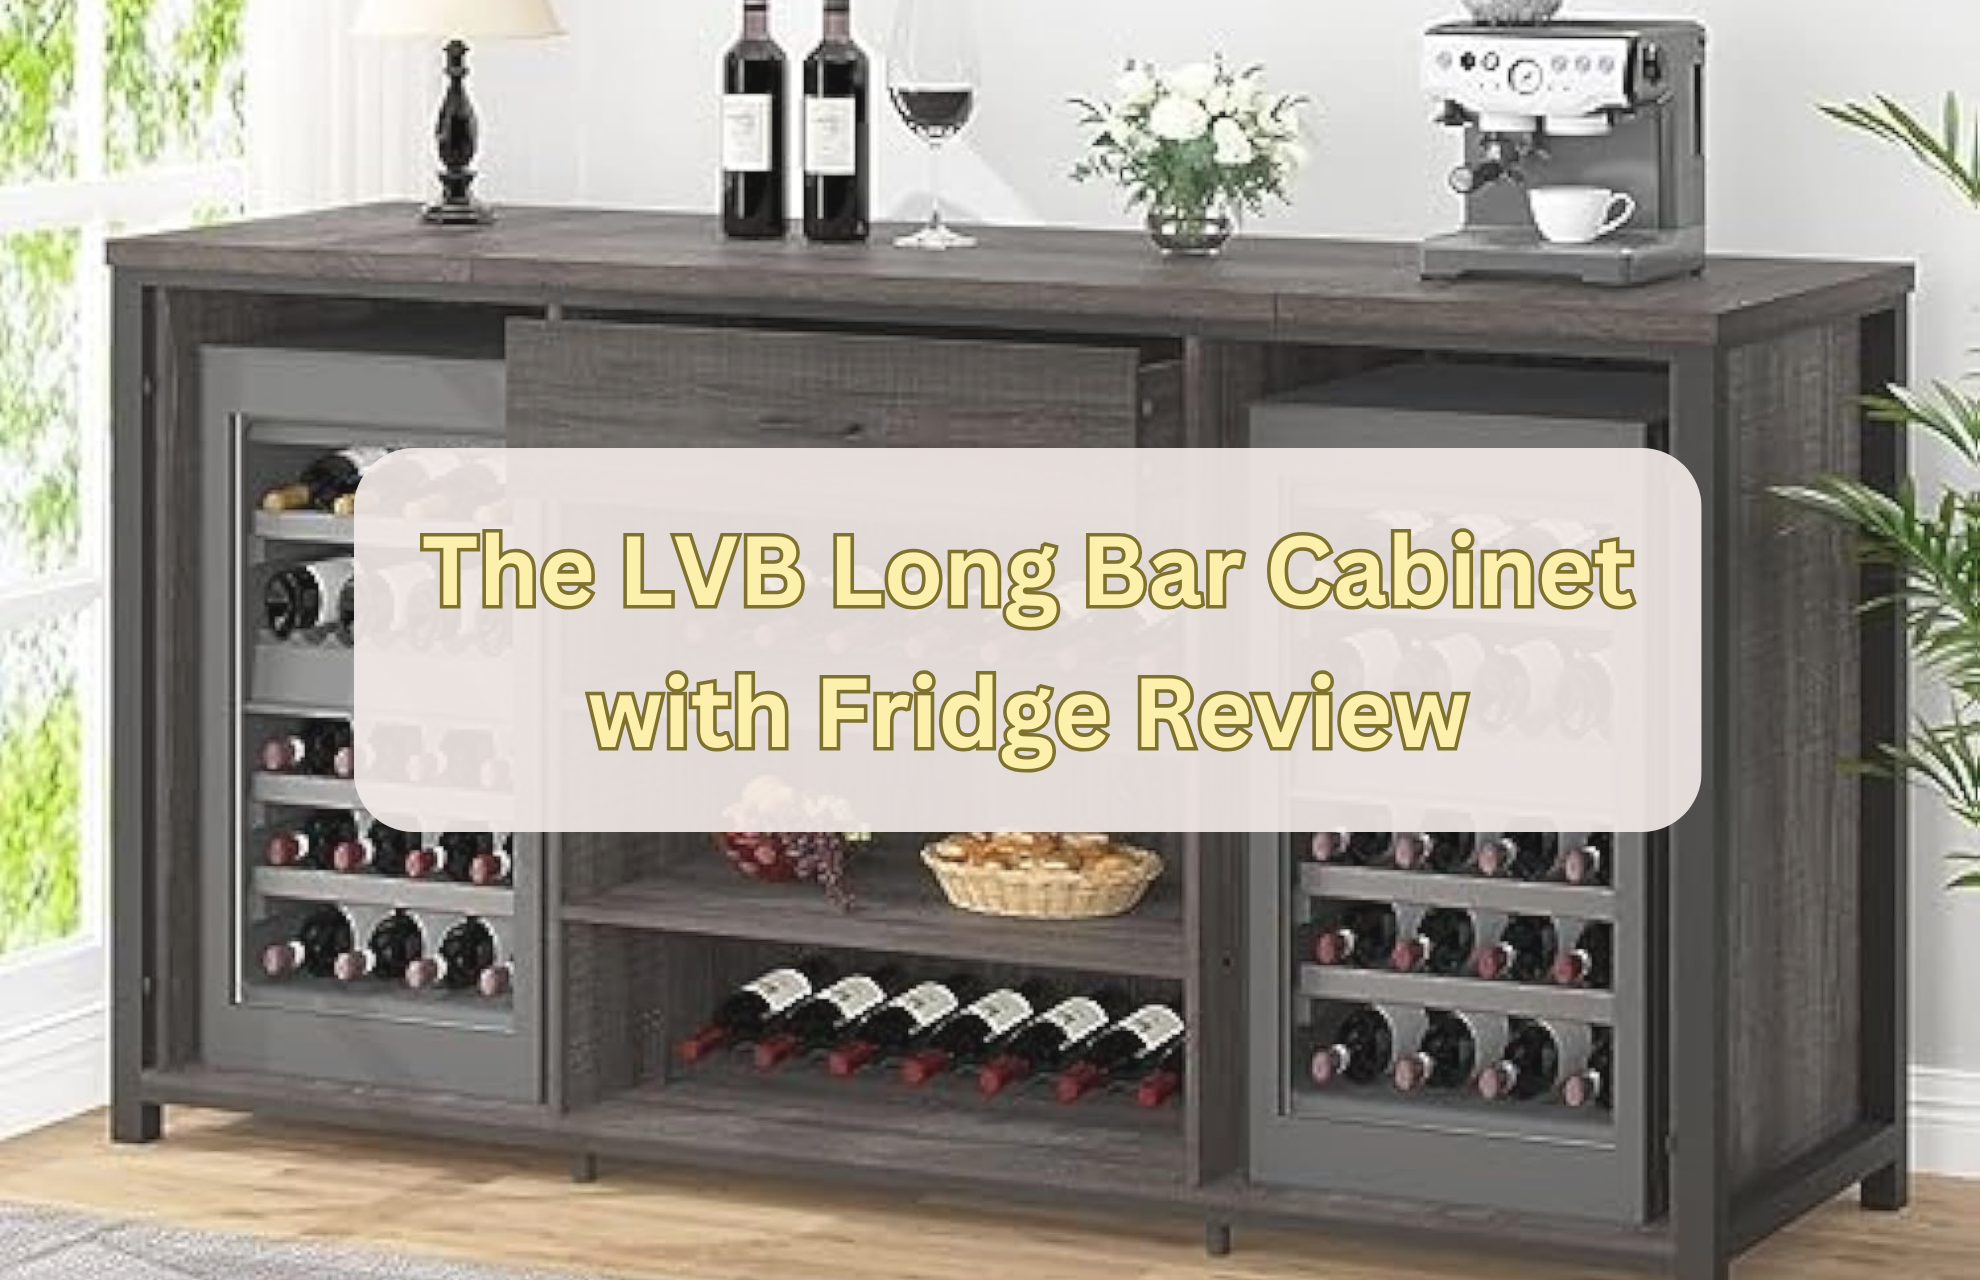 The LVB Long Bar Cabinet with Fridge Review